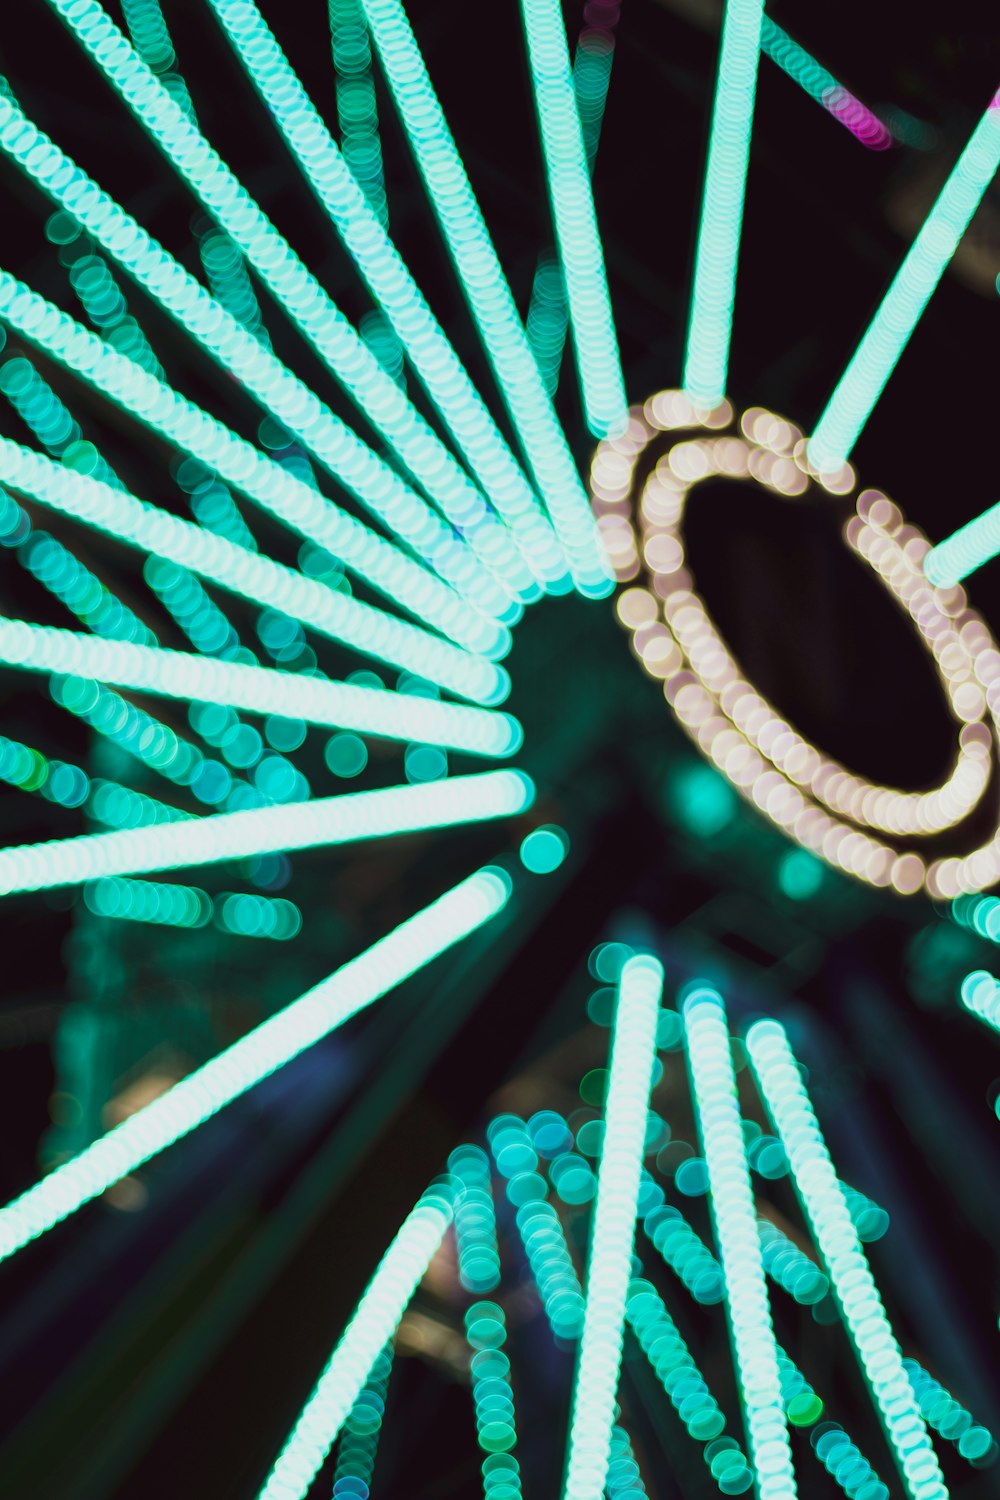 a close up of a ferris wheel at night